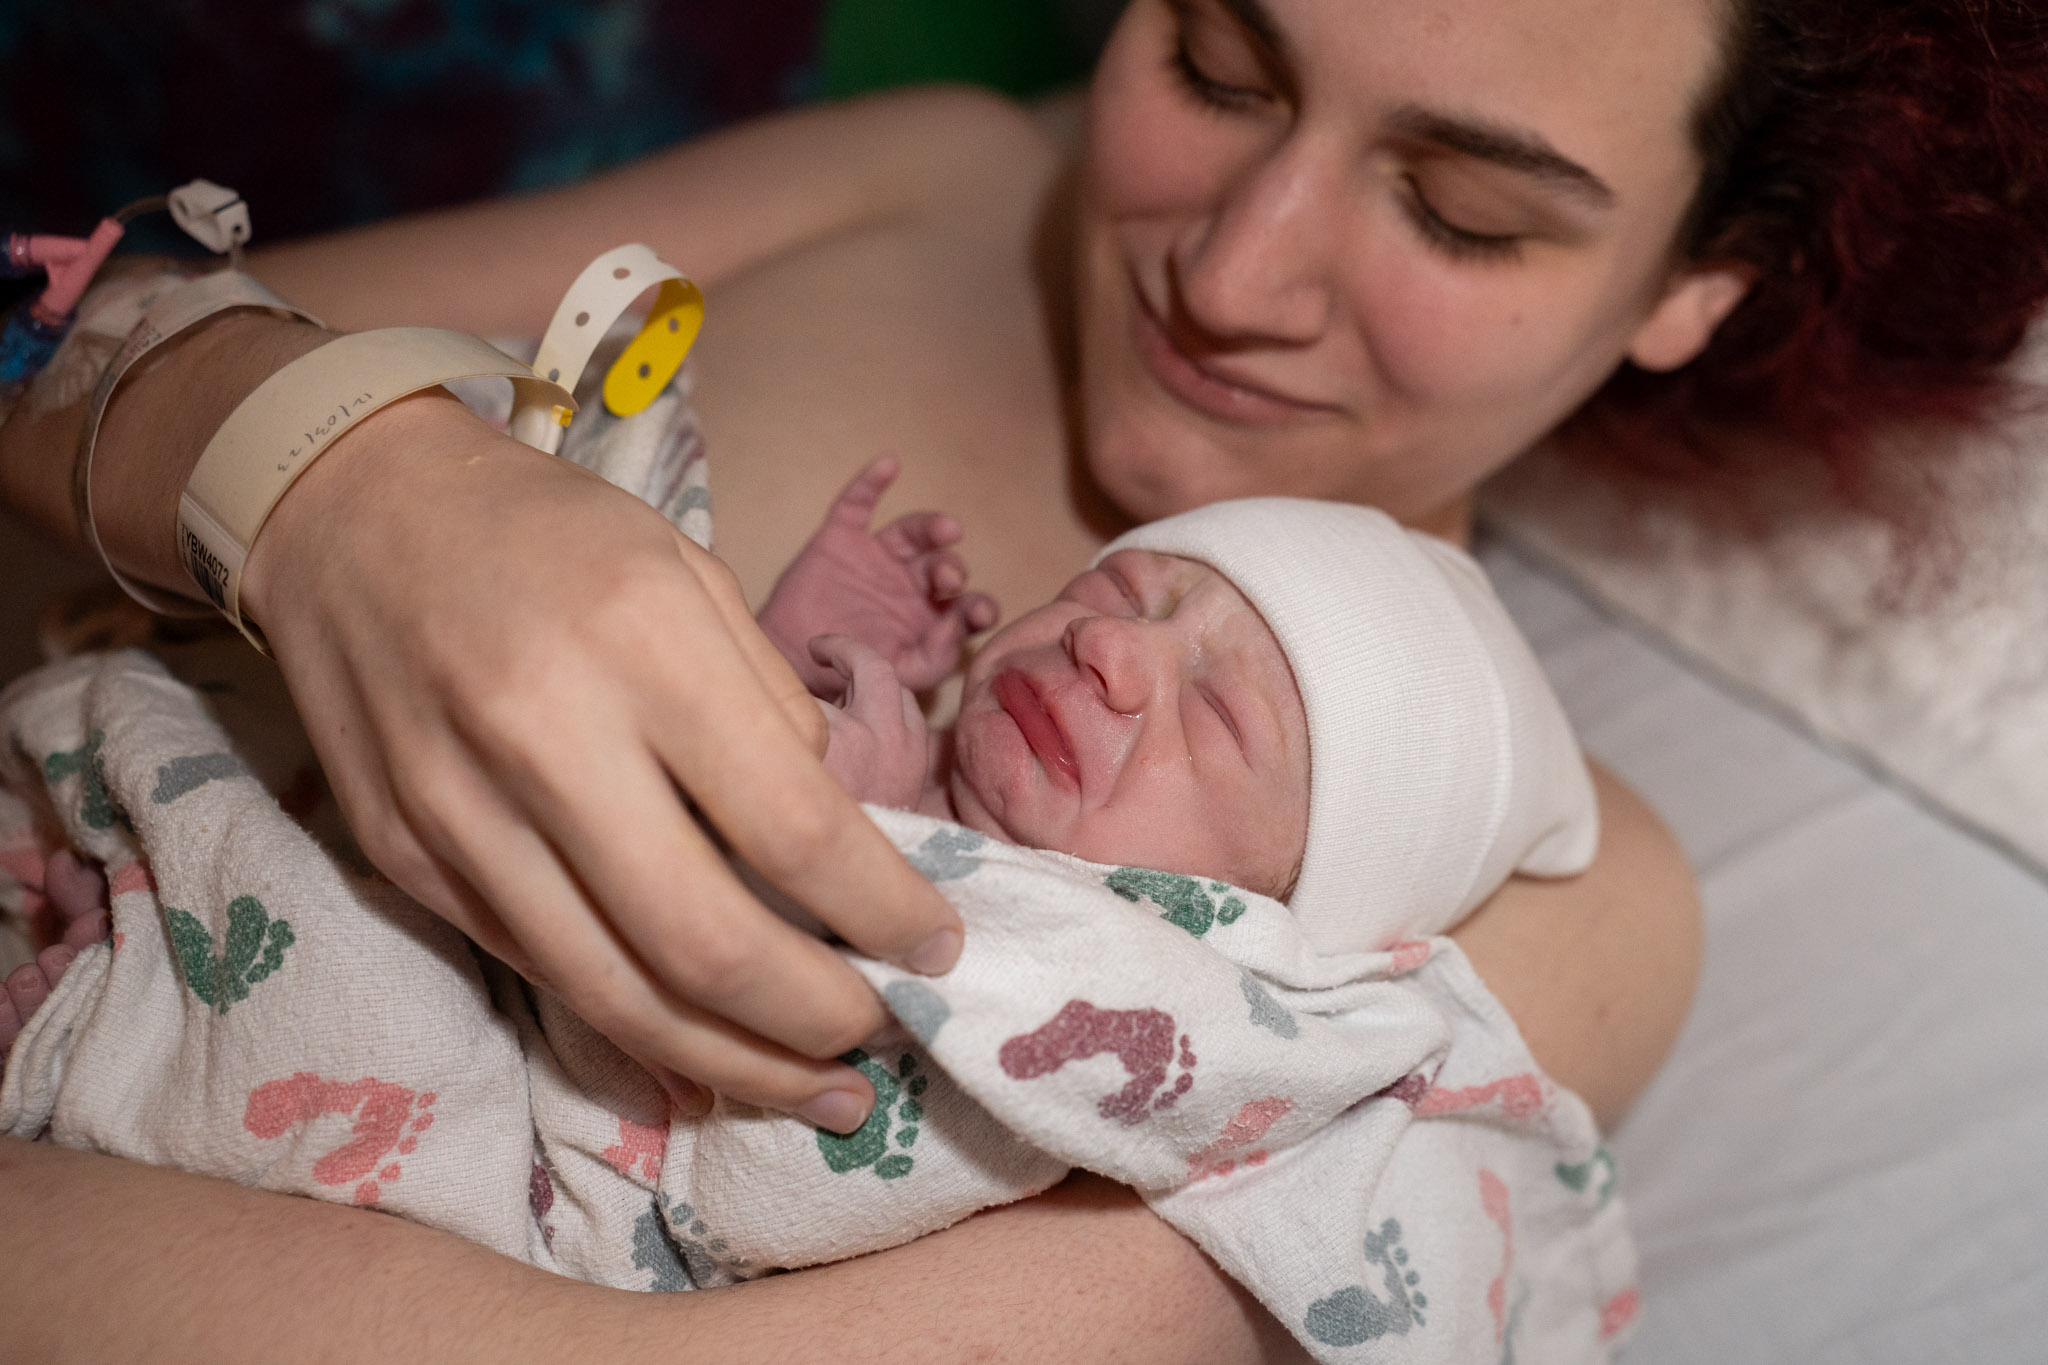 a smiling mother holds baby for the first time after giving birth while the baby is scowling